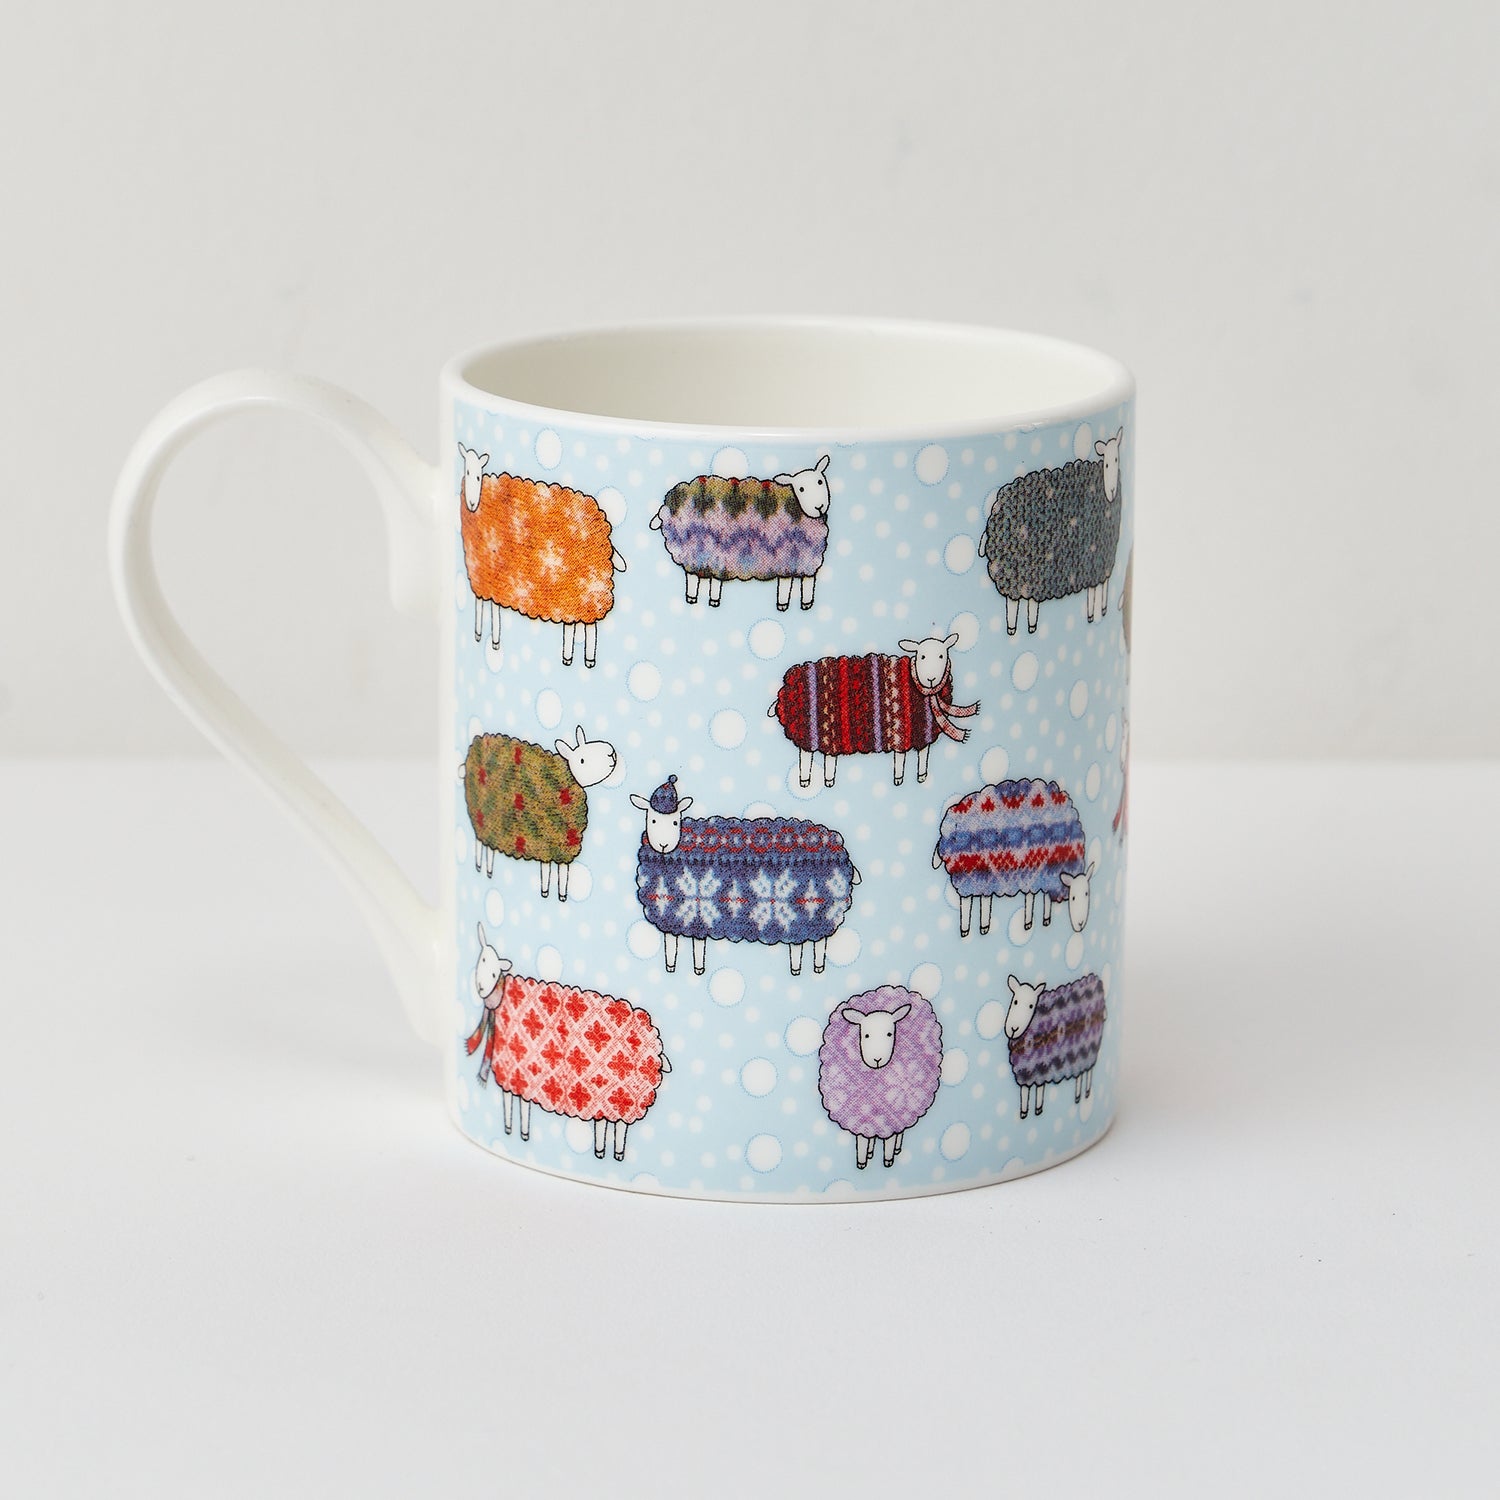 Sheep in the Snow Mug by Mary Kilvert